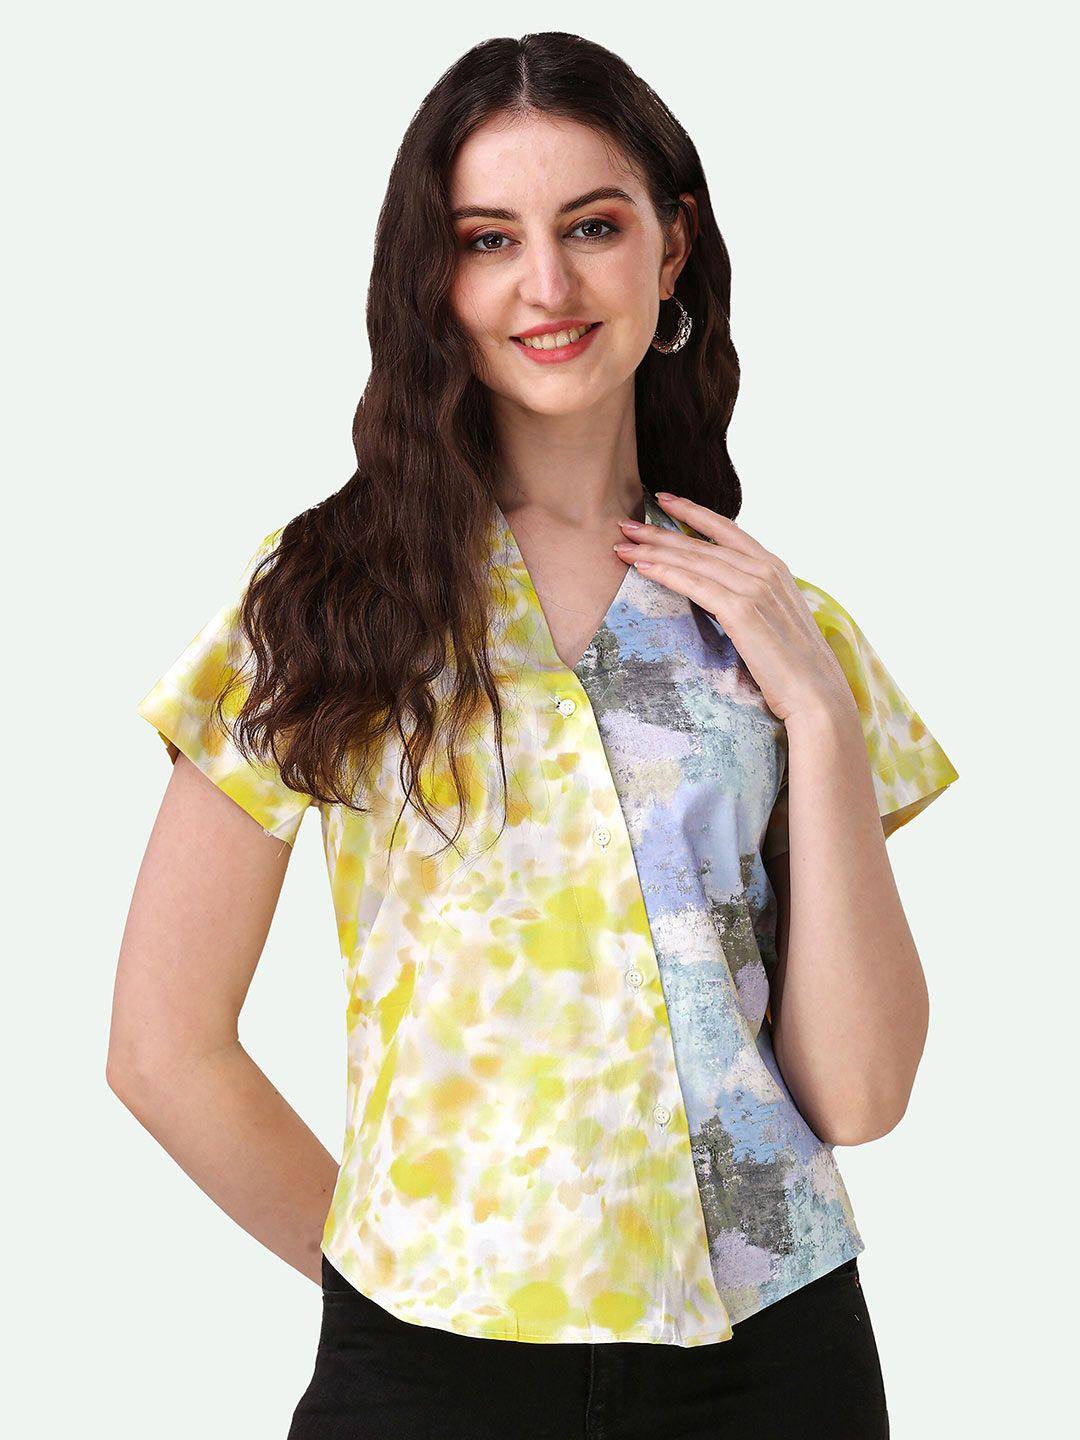 french crown abstract printed v-neck shirt style top